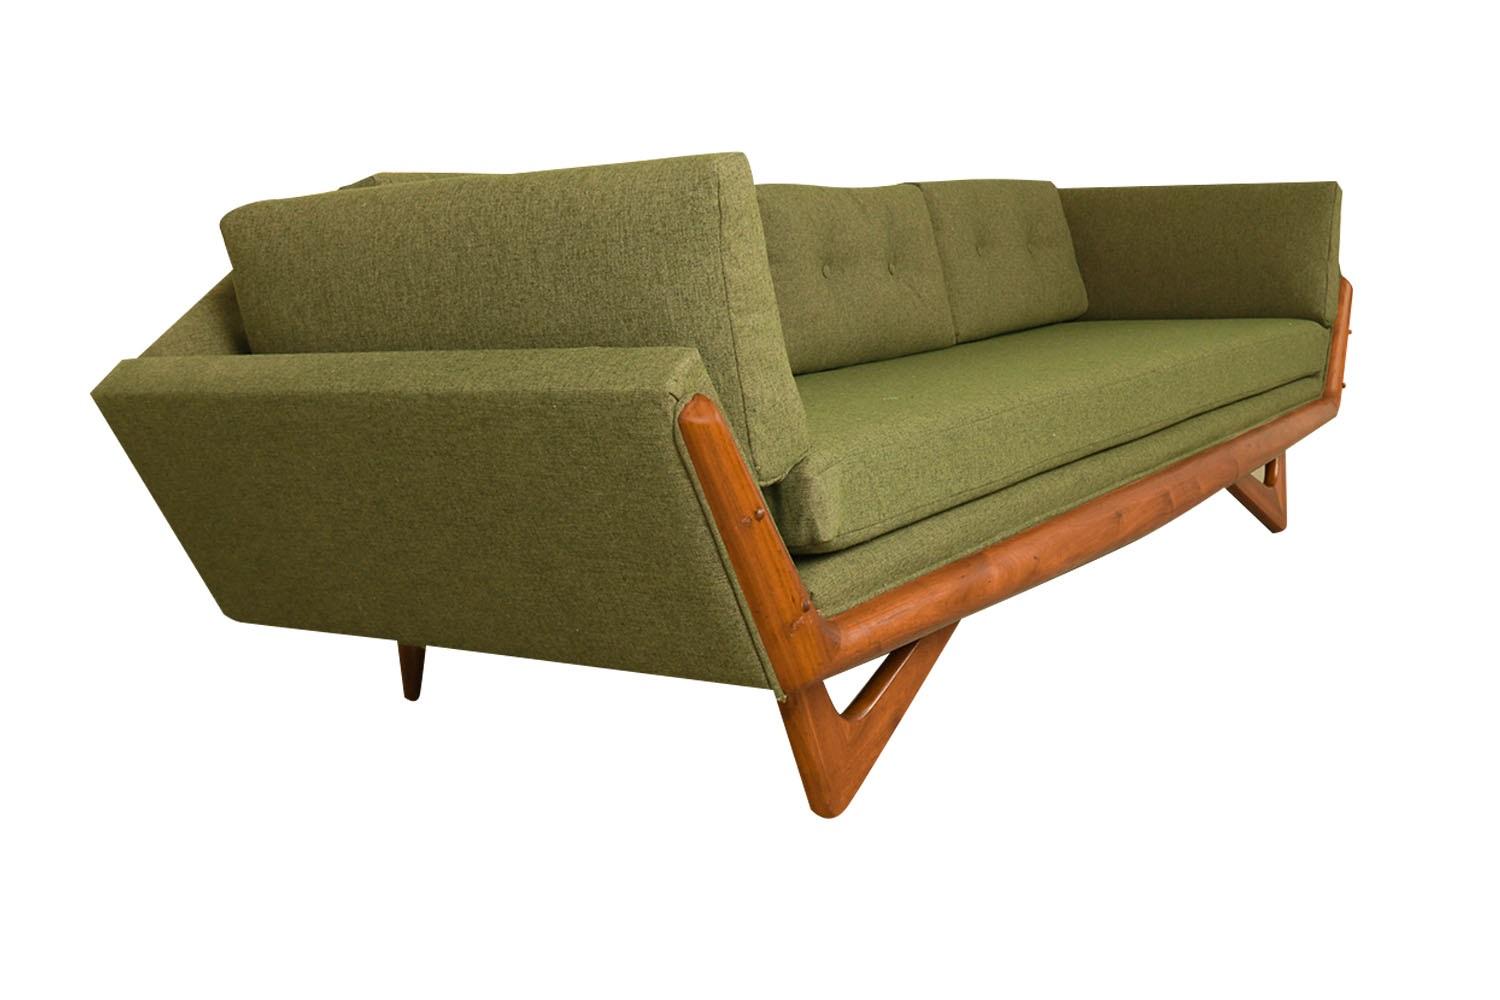 Mid-century modern stunning, beautiful, high-quality long gondola walnut framed sofa model 2640-S, designed by Adrian Pearsall for Craft Associates. In new upholstery fabric and high-density foam. An exceptional sofa both for its form and quality,